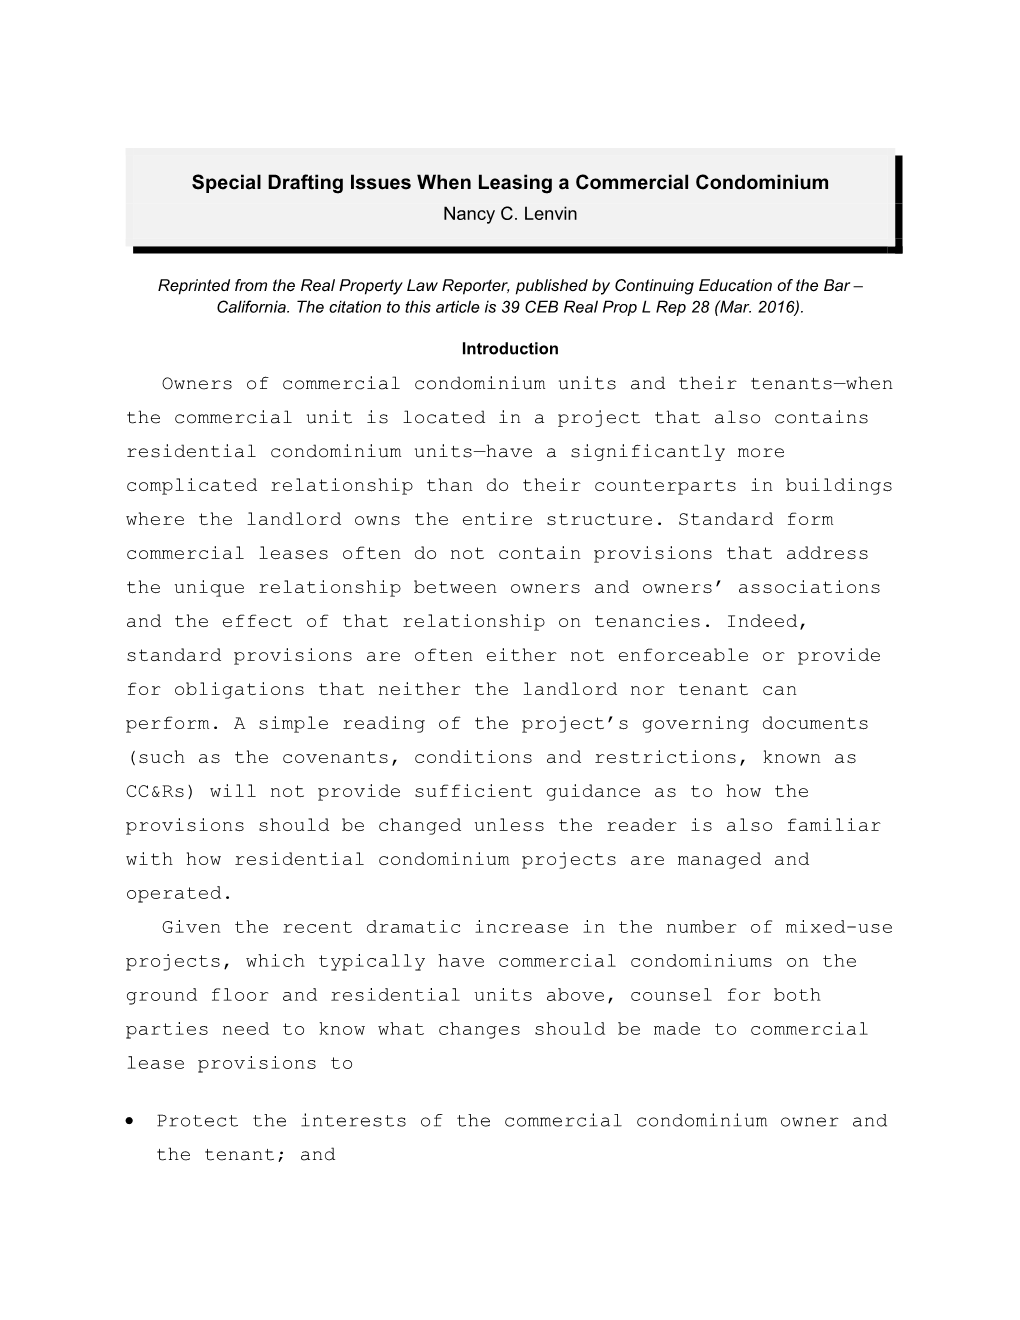 Special Drafting Issues When Leasing a Commercial Condominium Nancy C